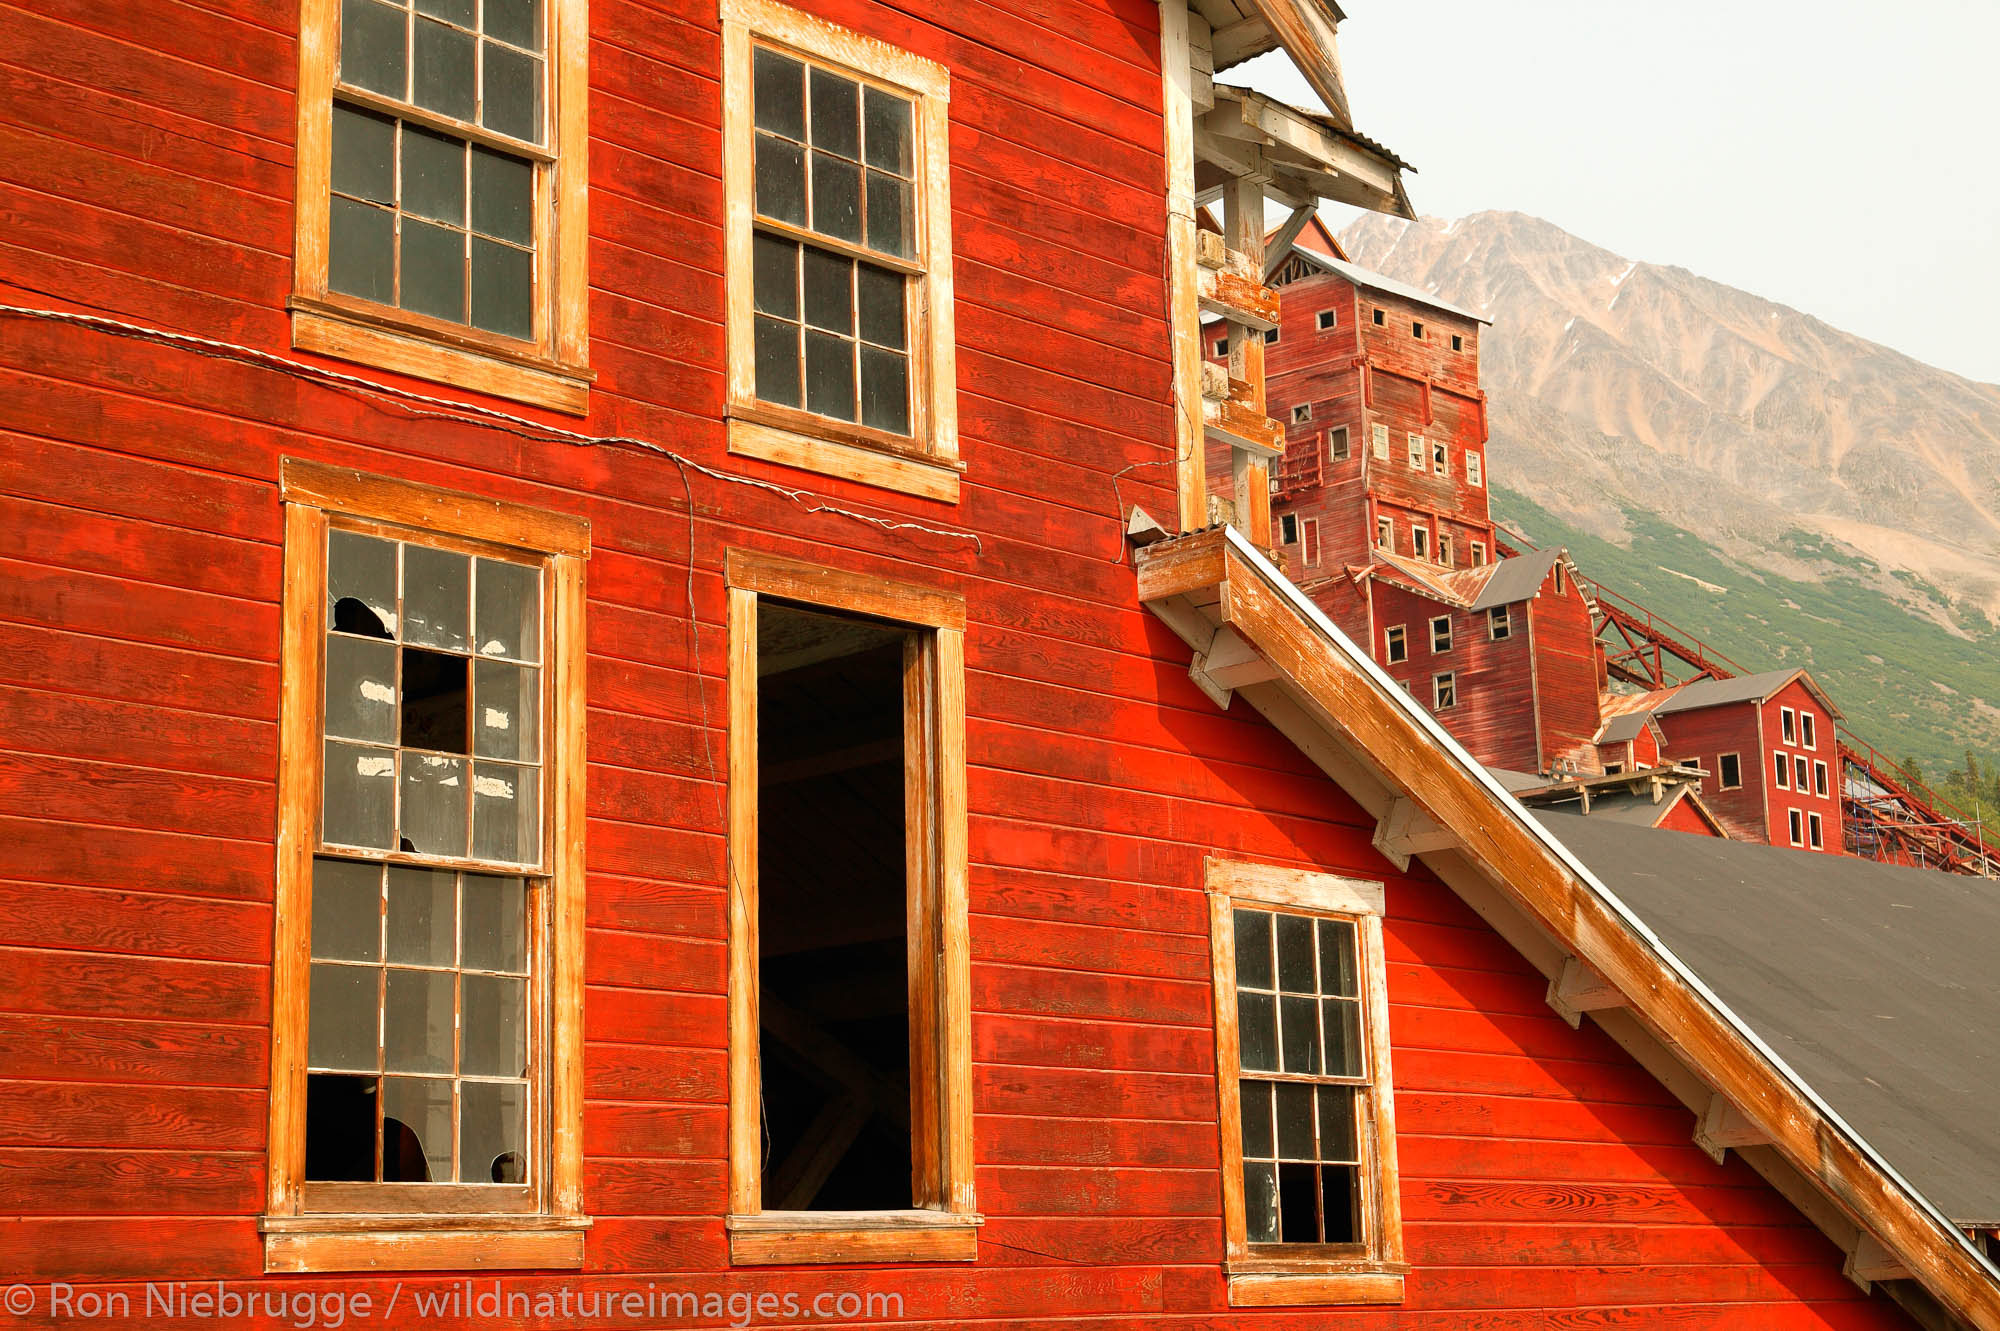 The historic Kennicott Mill built in 1907 by the Kennecott Copper Corporation near McCarthy, Wrangell-St. Elias National Park...